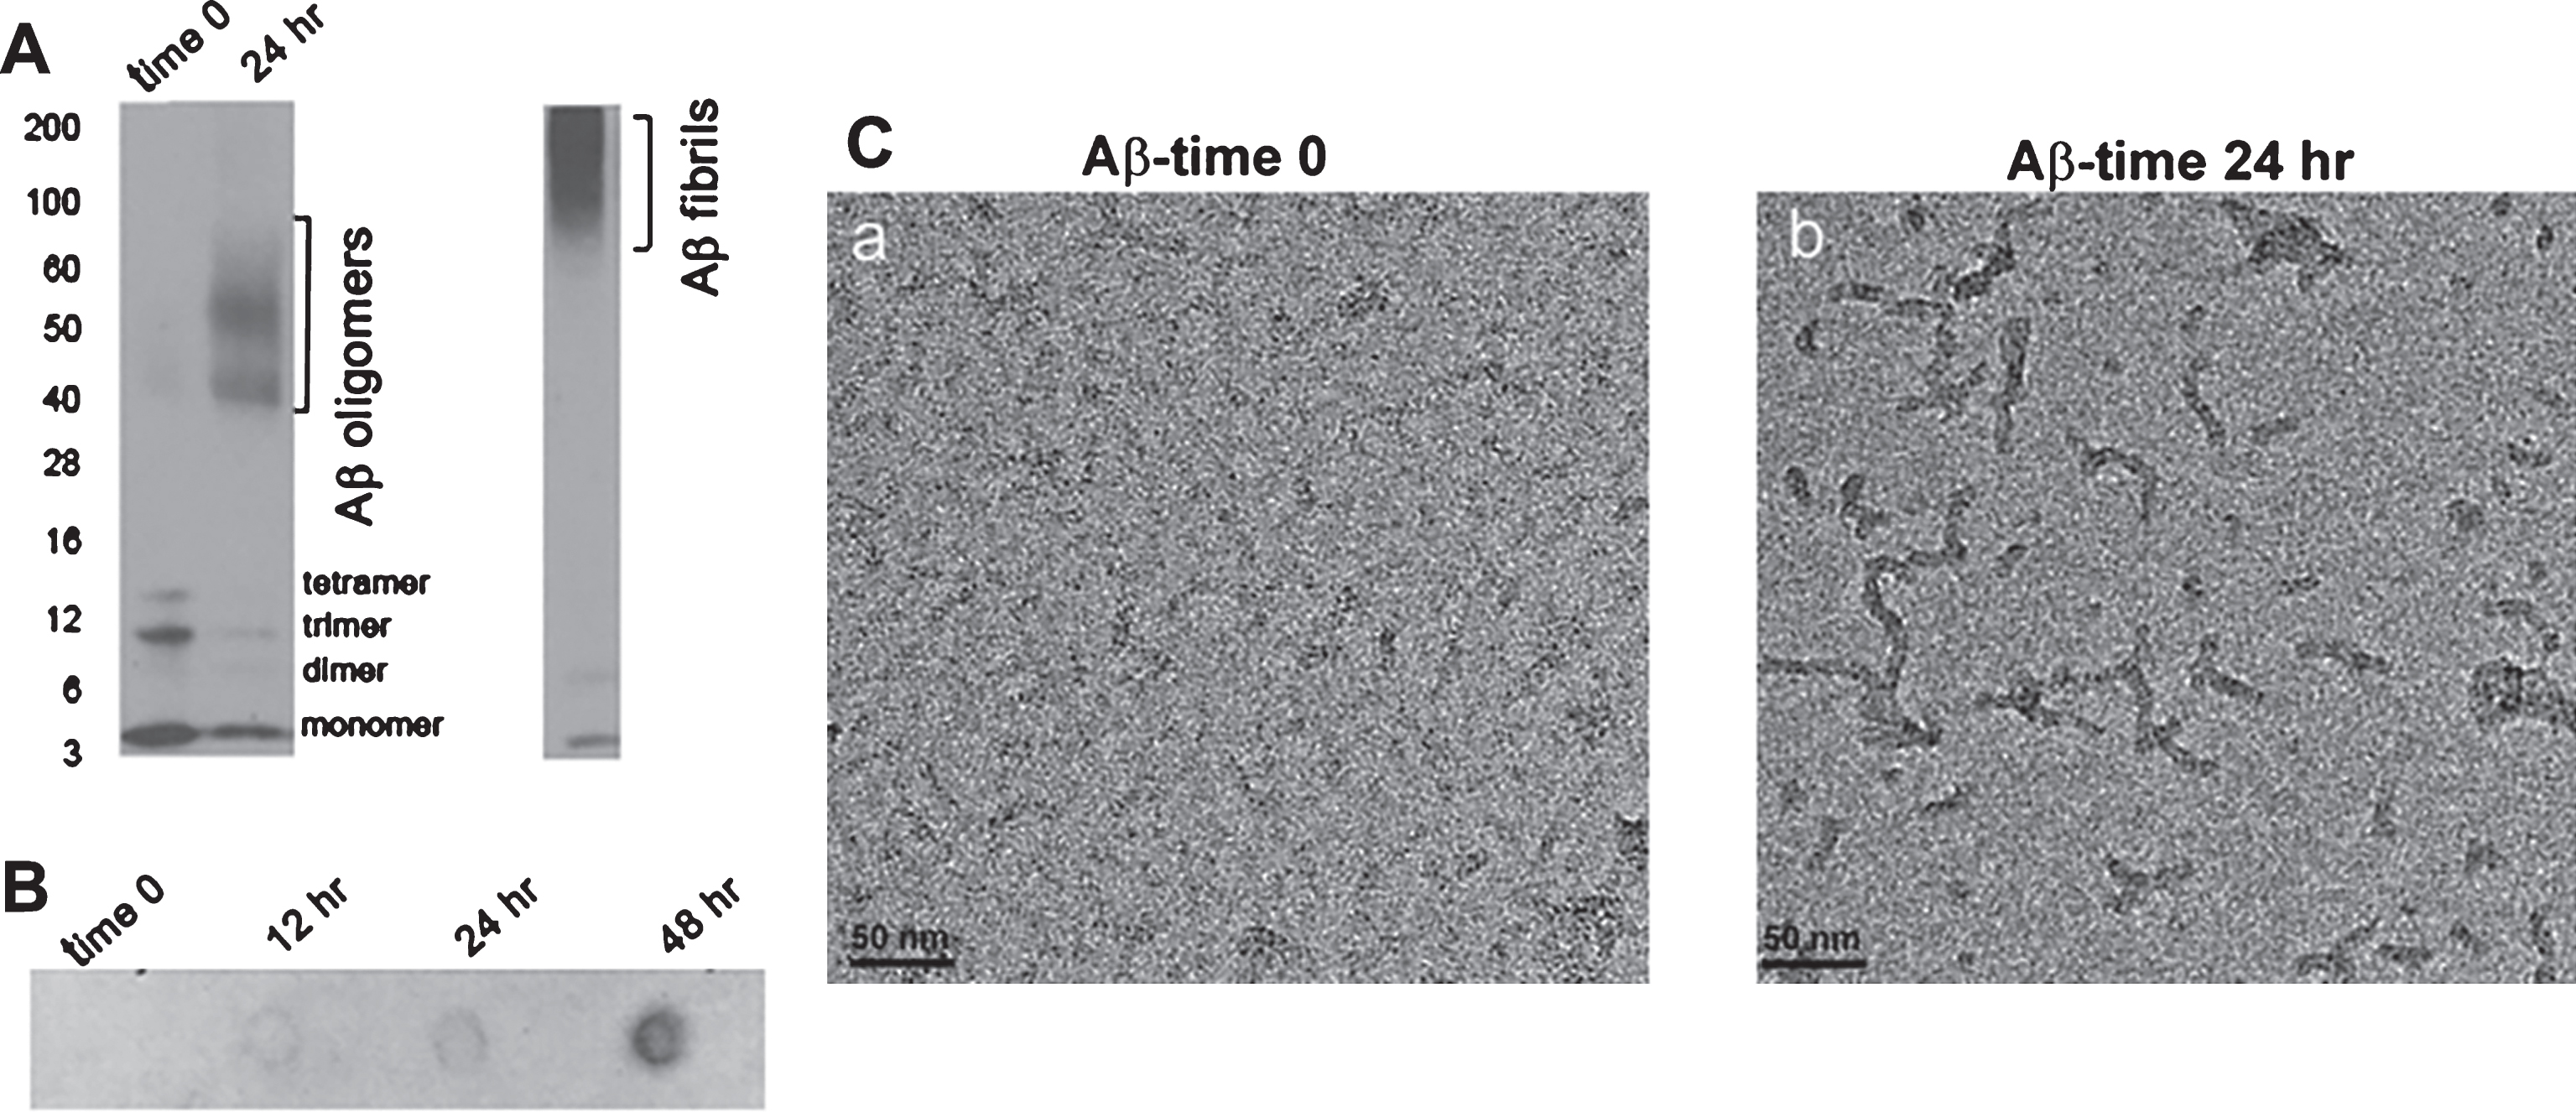 Characterization of Aβ oligomer. Disaggregated Aβ42 was incubated at room temperature for 24 h as indicated in the Methods. A) SDS PAGE of Aβ42 at time 0 and 24 h after the start of incubation. Western blotting was performed with anti-Aβ antibody, 6E10. On the left are shown molecular weight markers. Aβ oligomers migrate between 40 and 90 kDa marker. Western blot of Aβ fibrils is shown for comparison. B) Aβ oligomers were identified by dot blotting performed with A11 antibody. Notice with the dot blot an increase in Aβ oligomers with increased incubation time. C) Electron micrograph of Aβ42 at time 0 (a) and 24 h after the start of incubation (b).